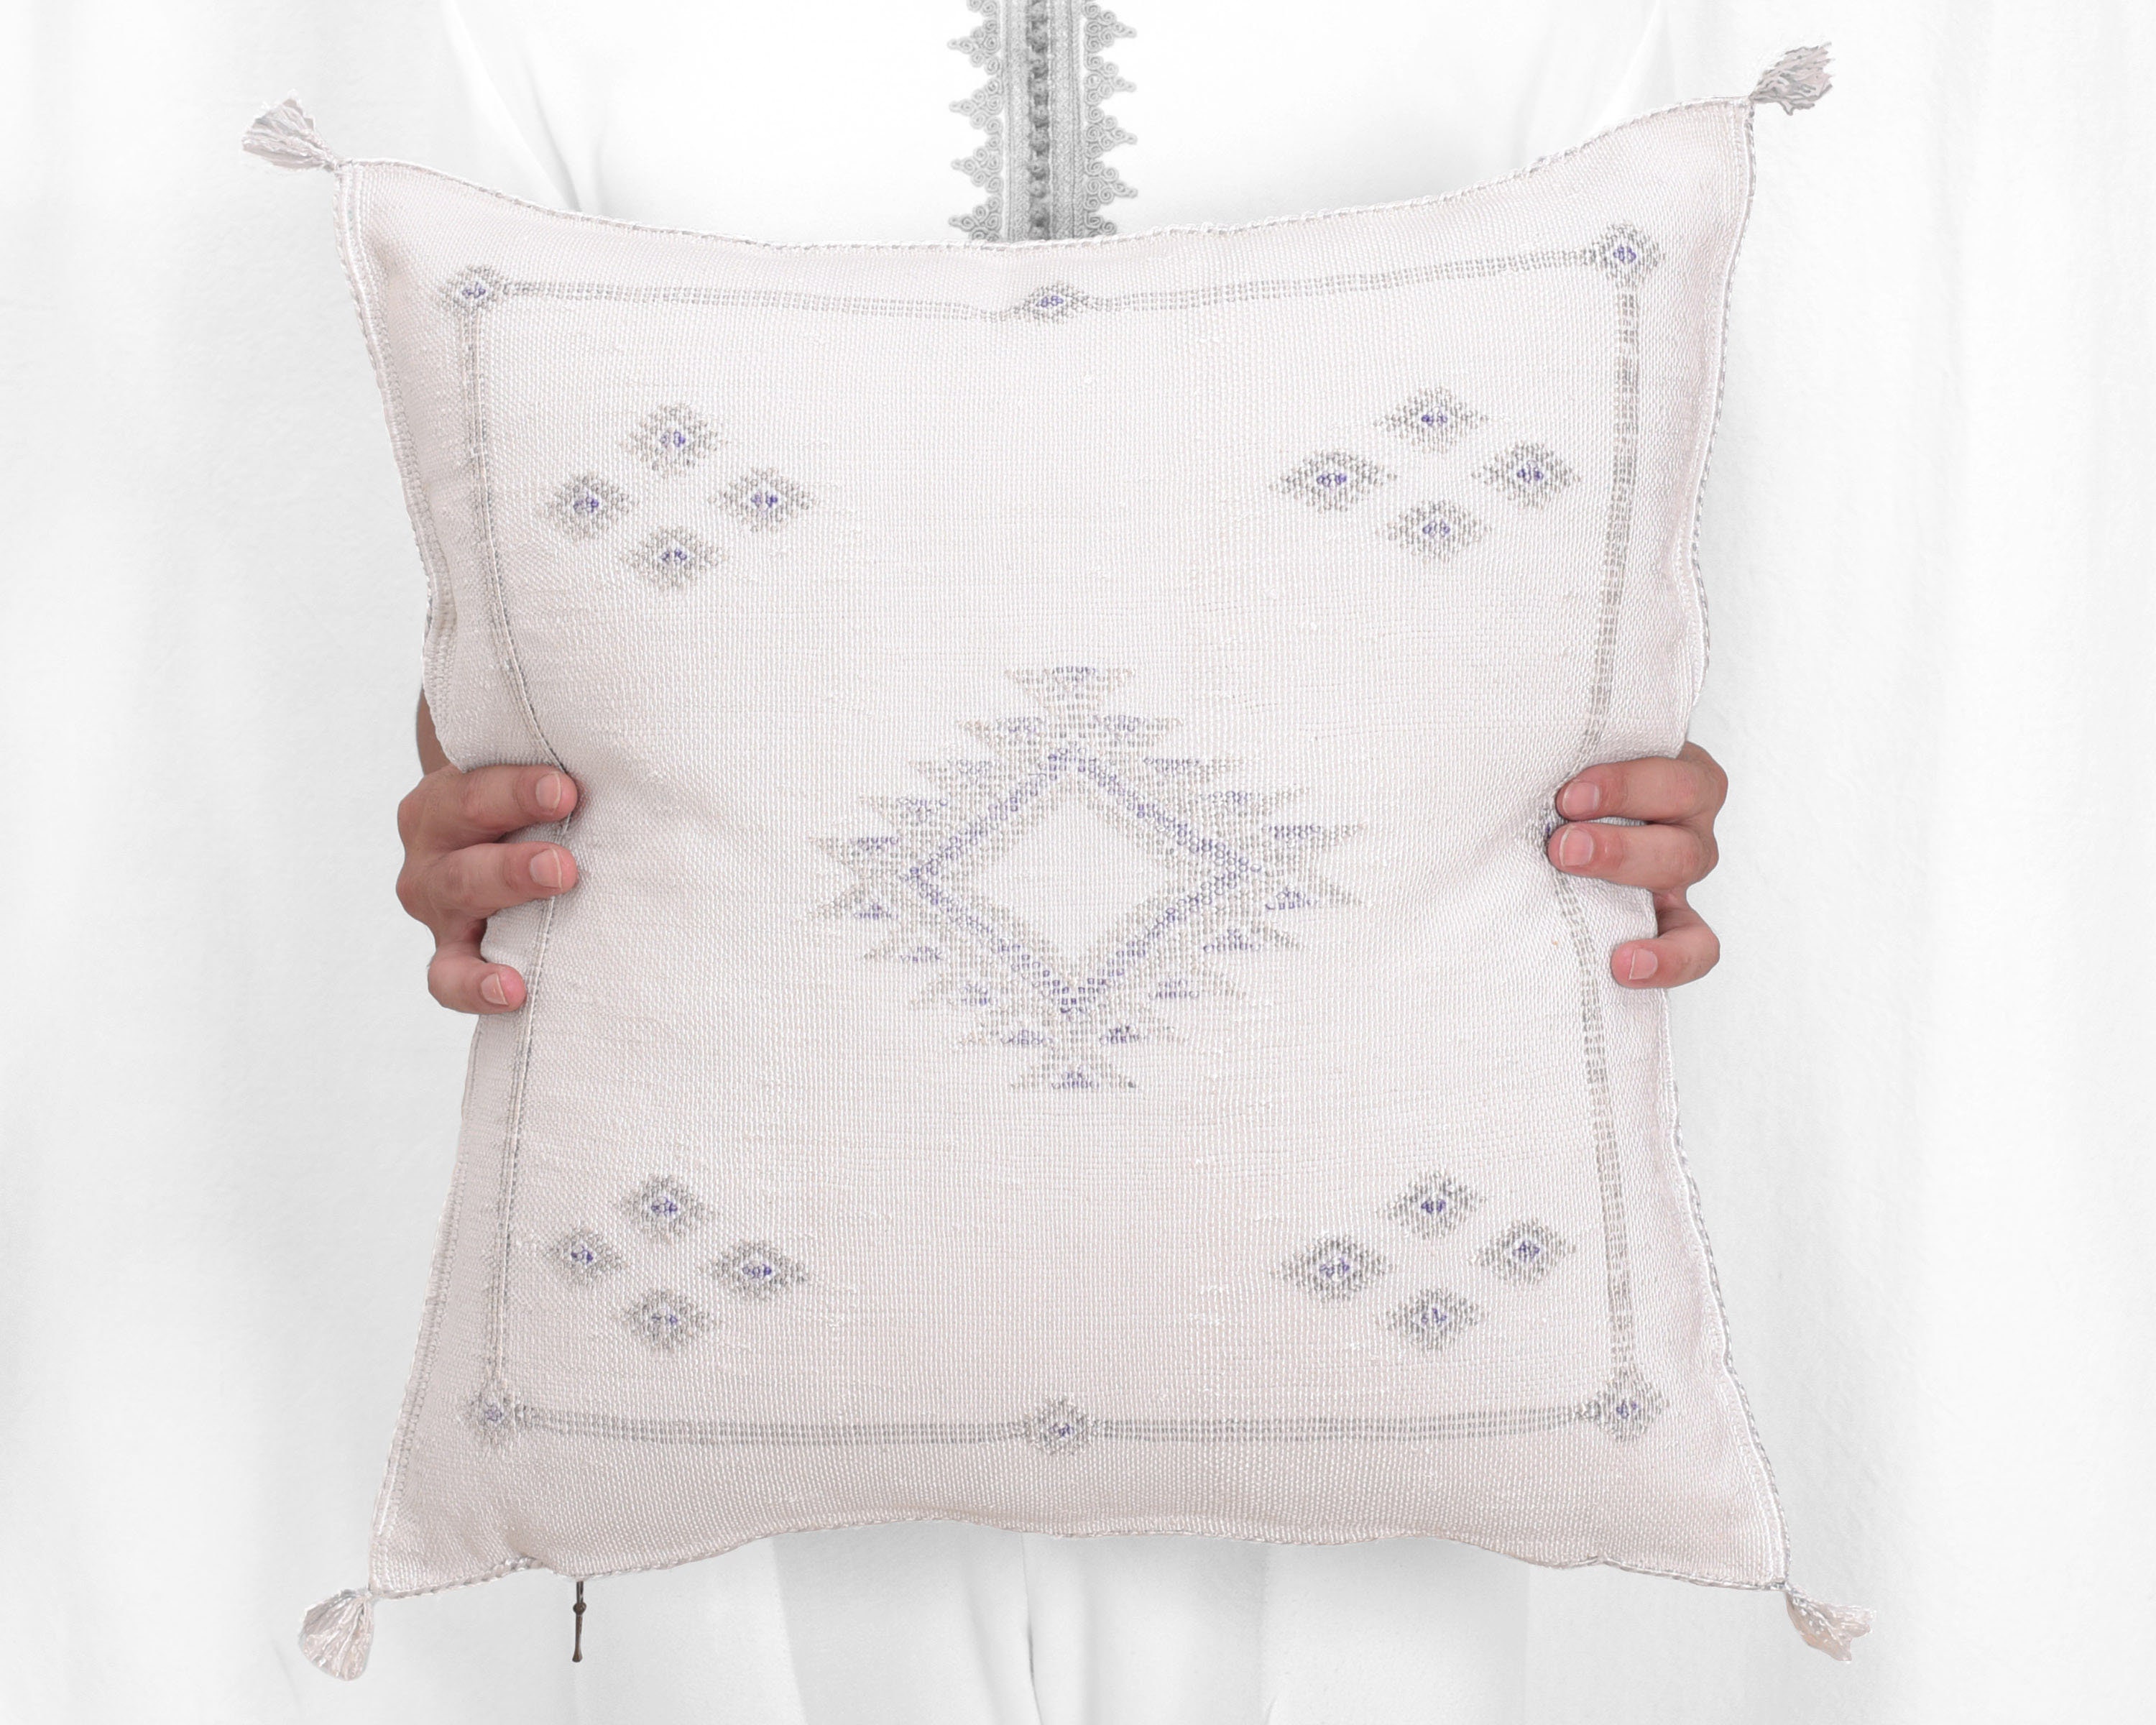 Ticking pillow piece pillow filling 45 x 45 cm white also suitable for  allergy sufferers